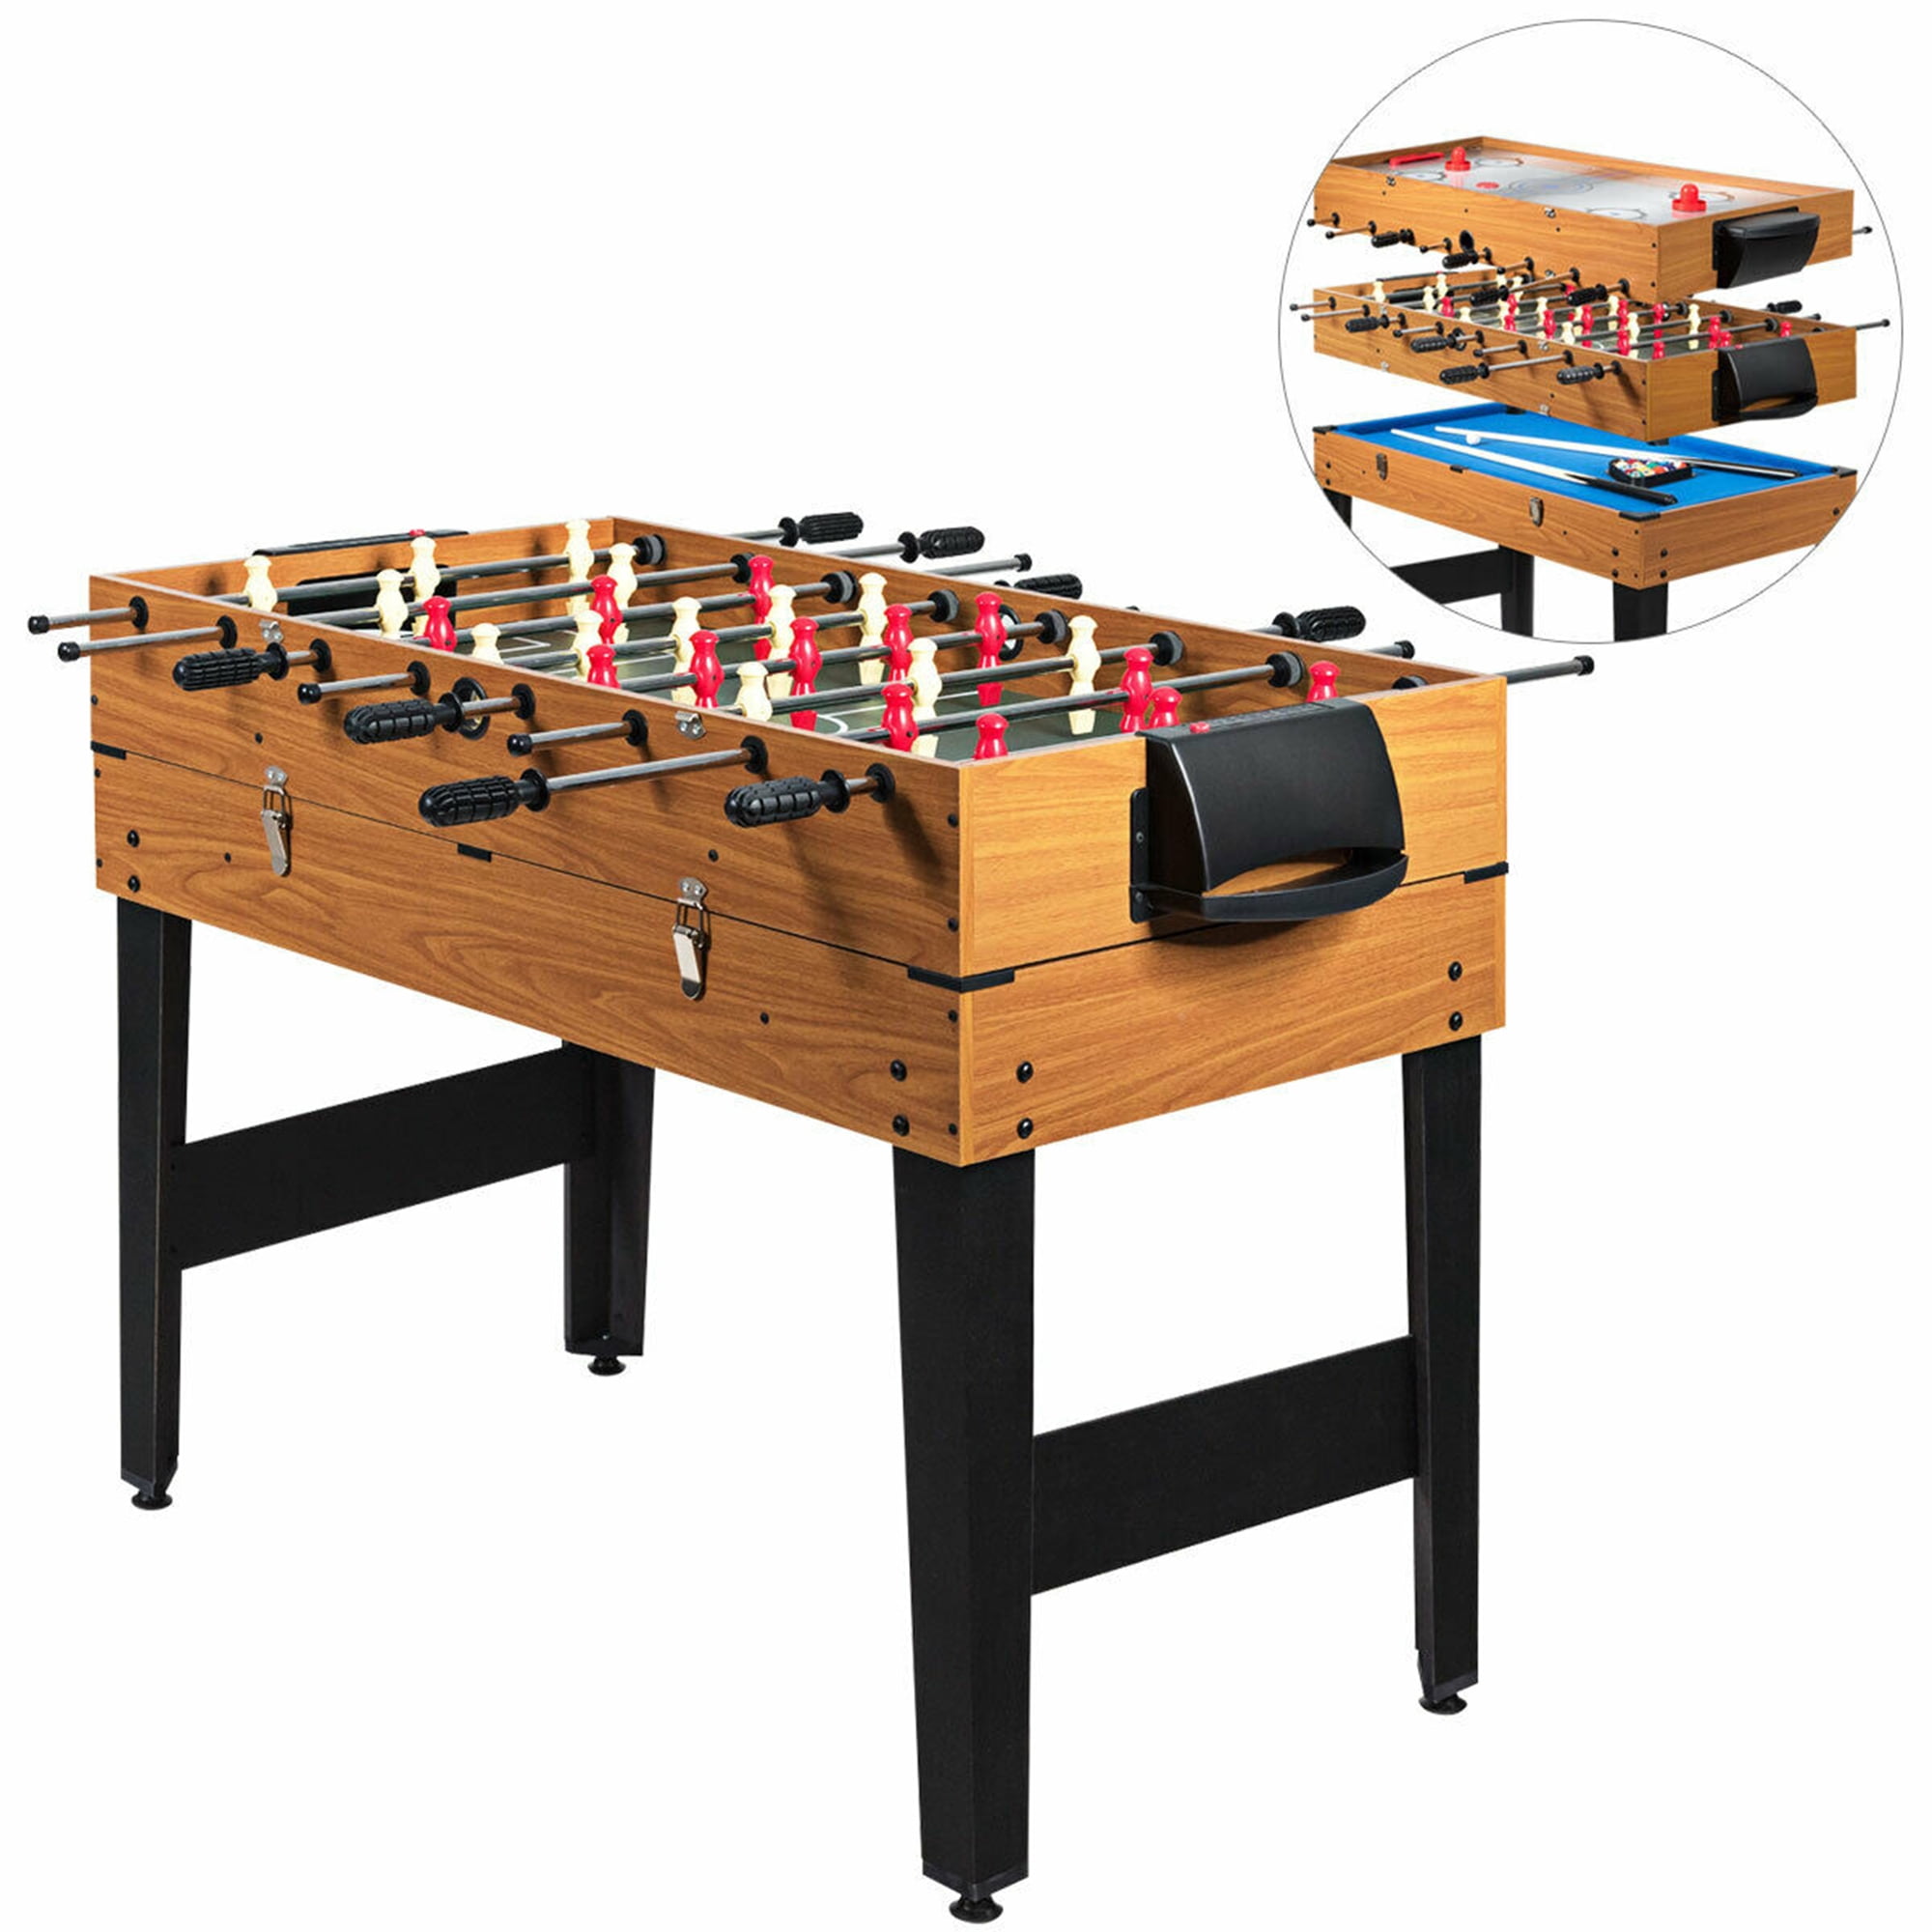 Details about   48" Competition Sized Home Recreation Wooden Soccer Foosball Table Brown 